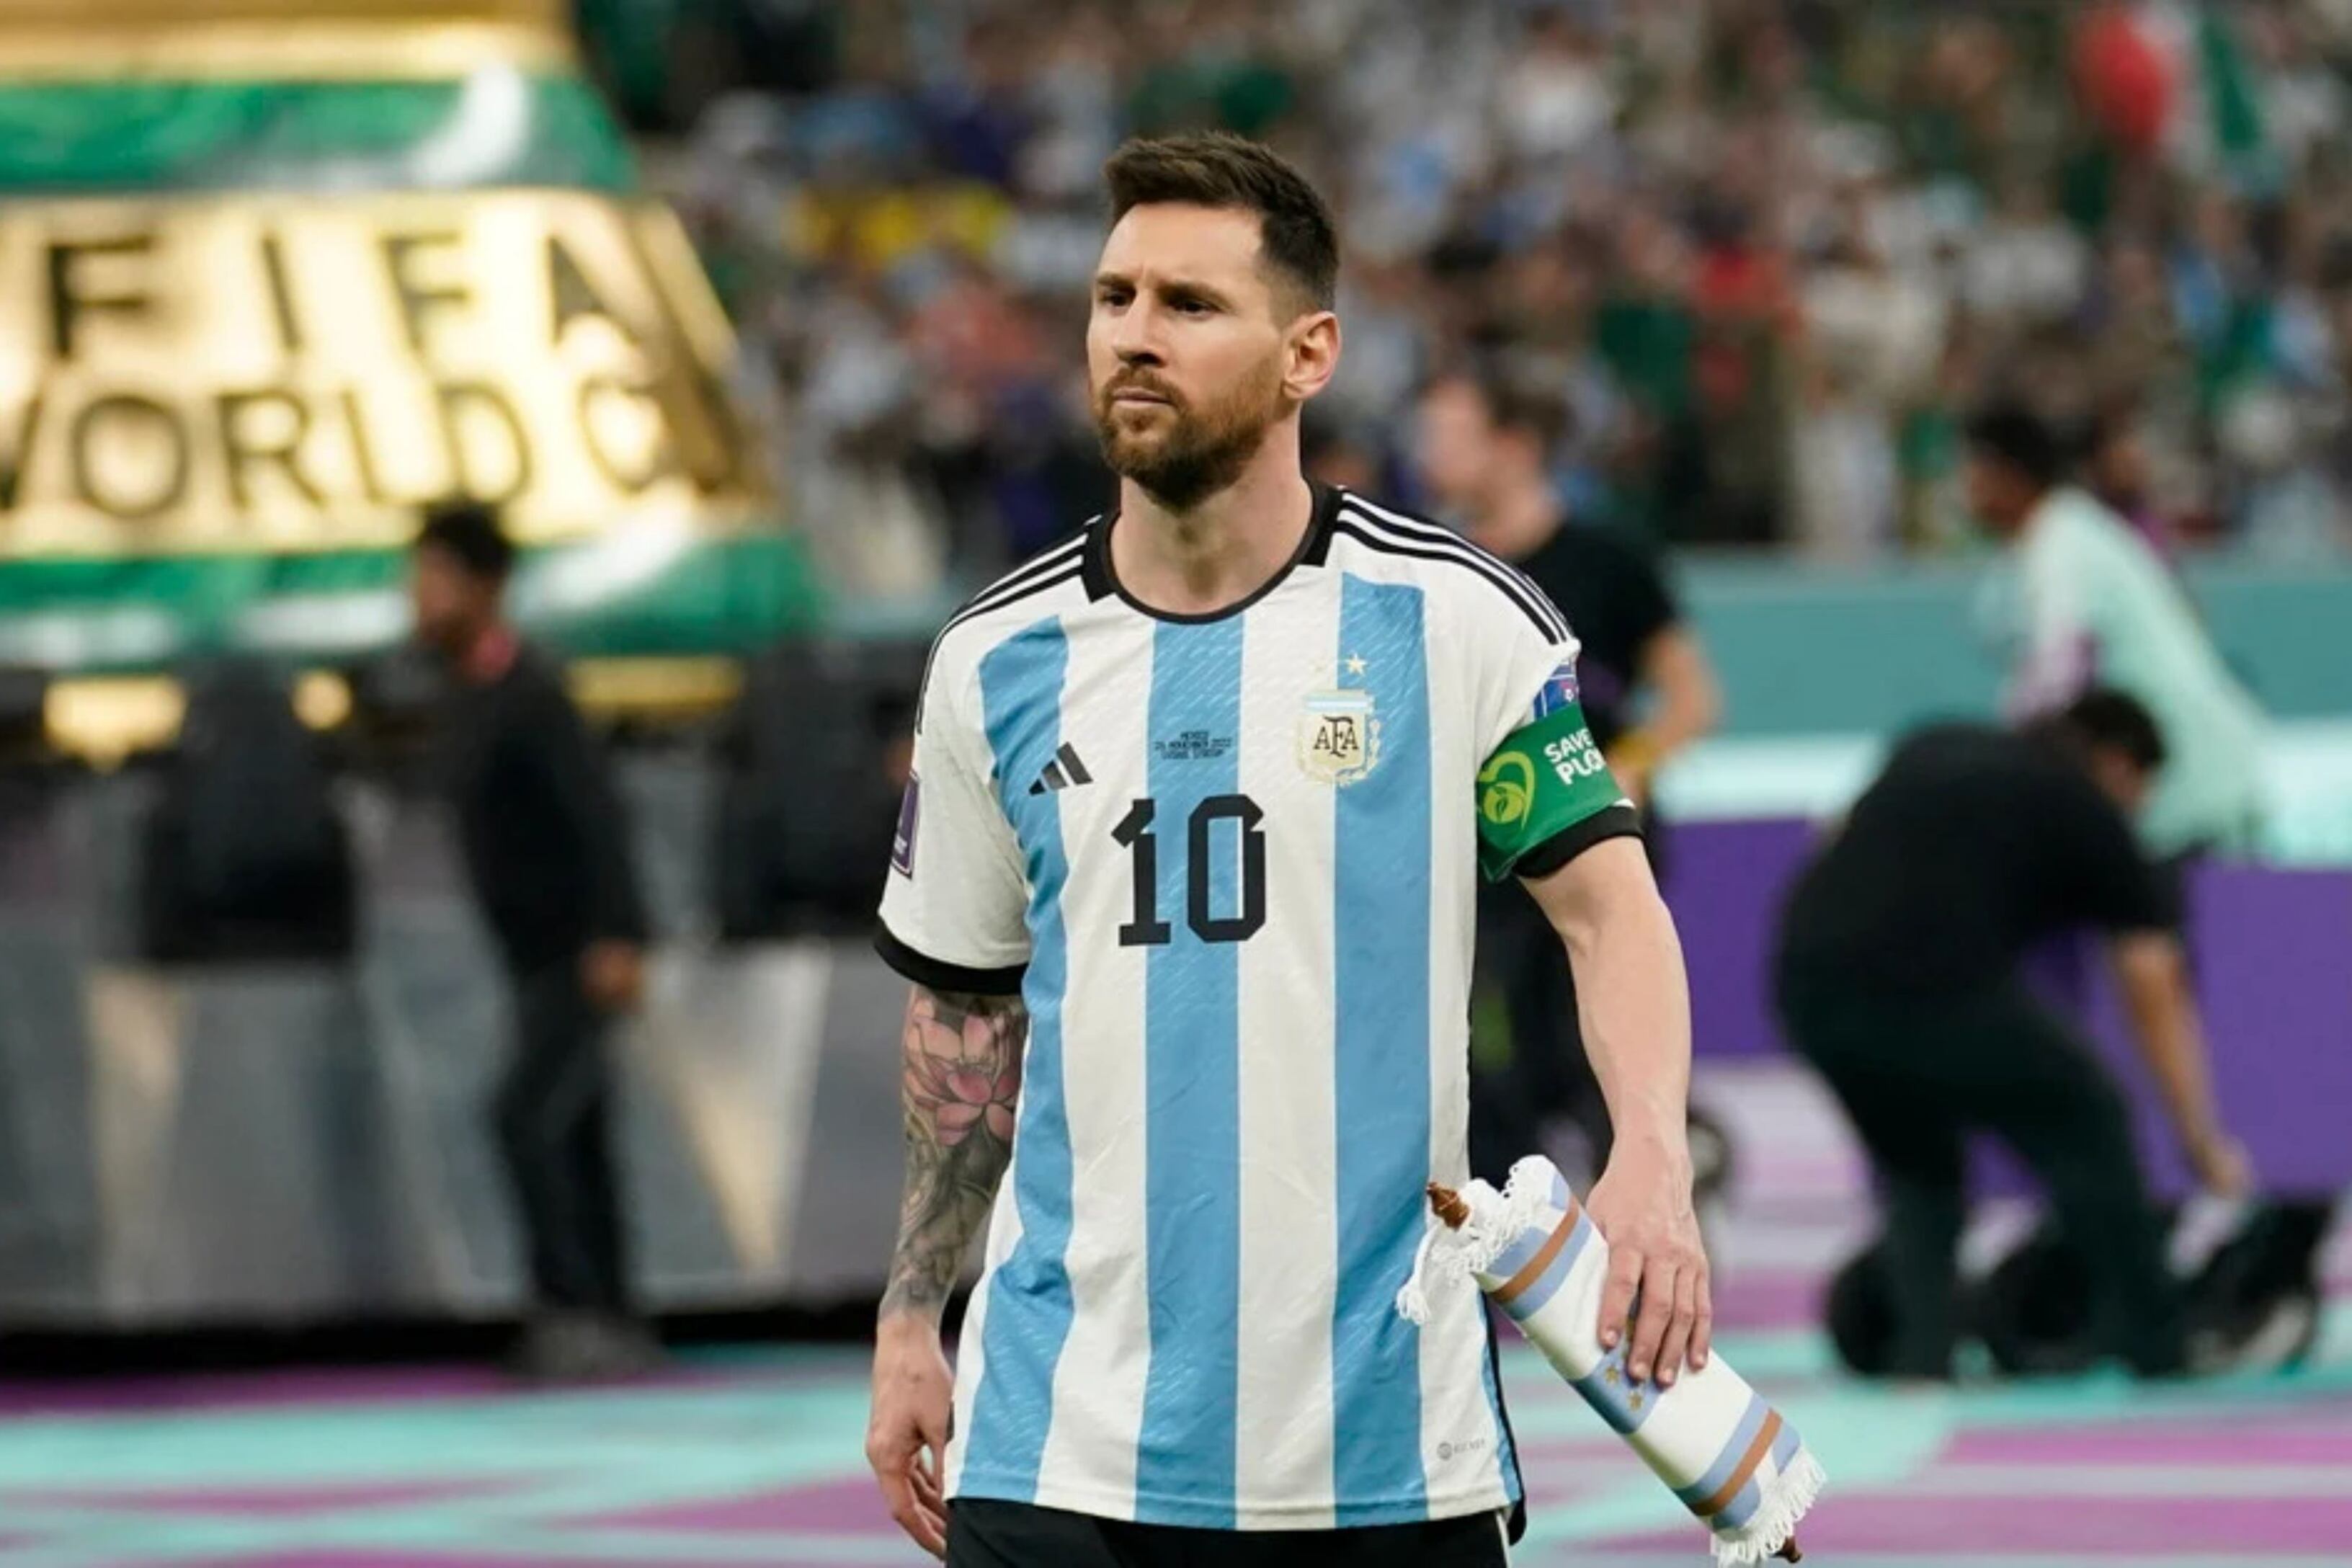 He failed to qualify for the World Cup, the Argentine who belittled Messi and pays karma